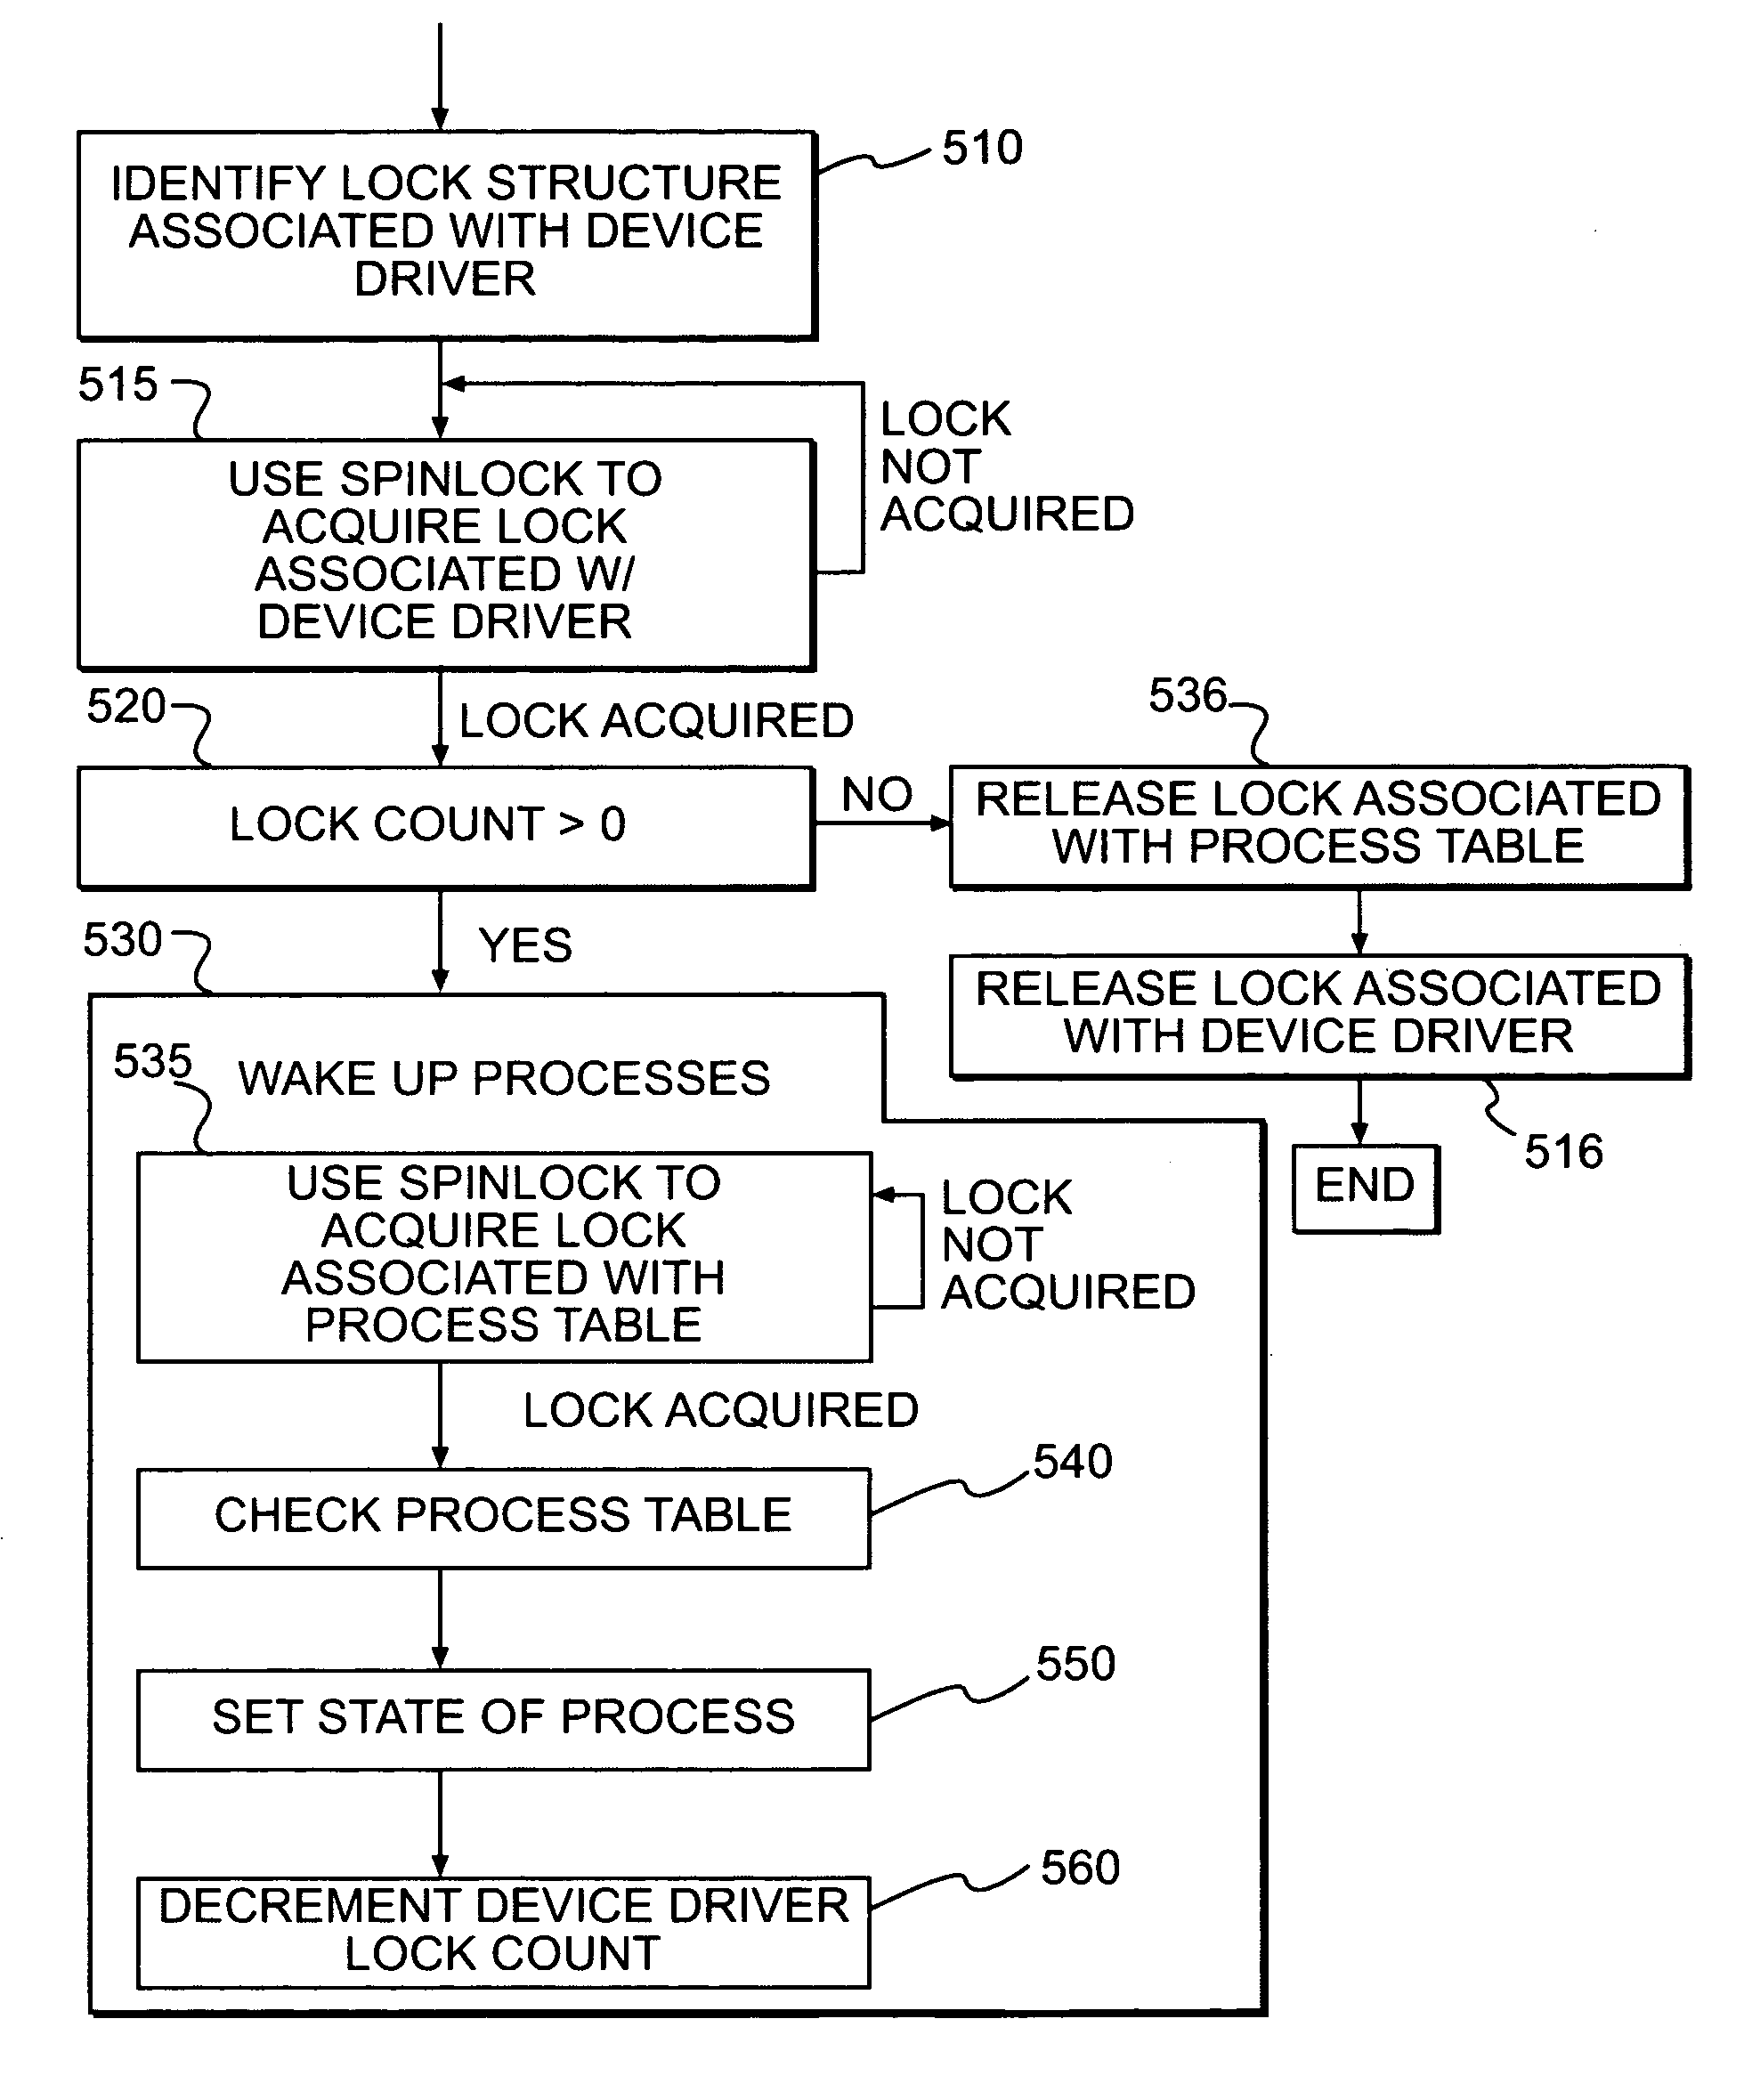 Systems and methods for suspending and resuming threads